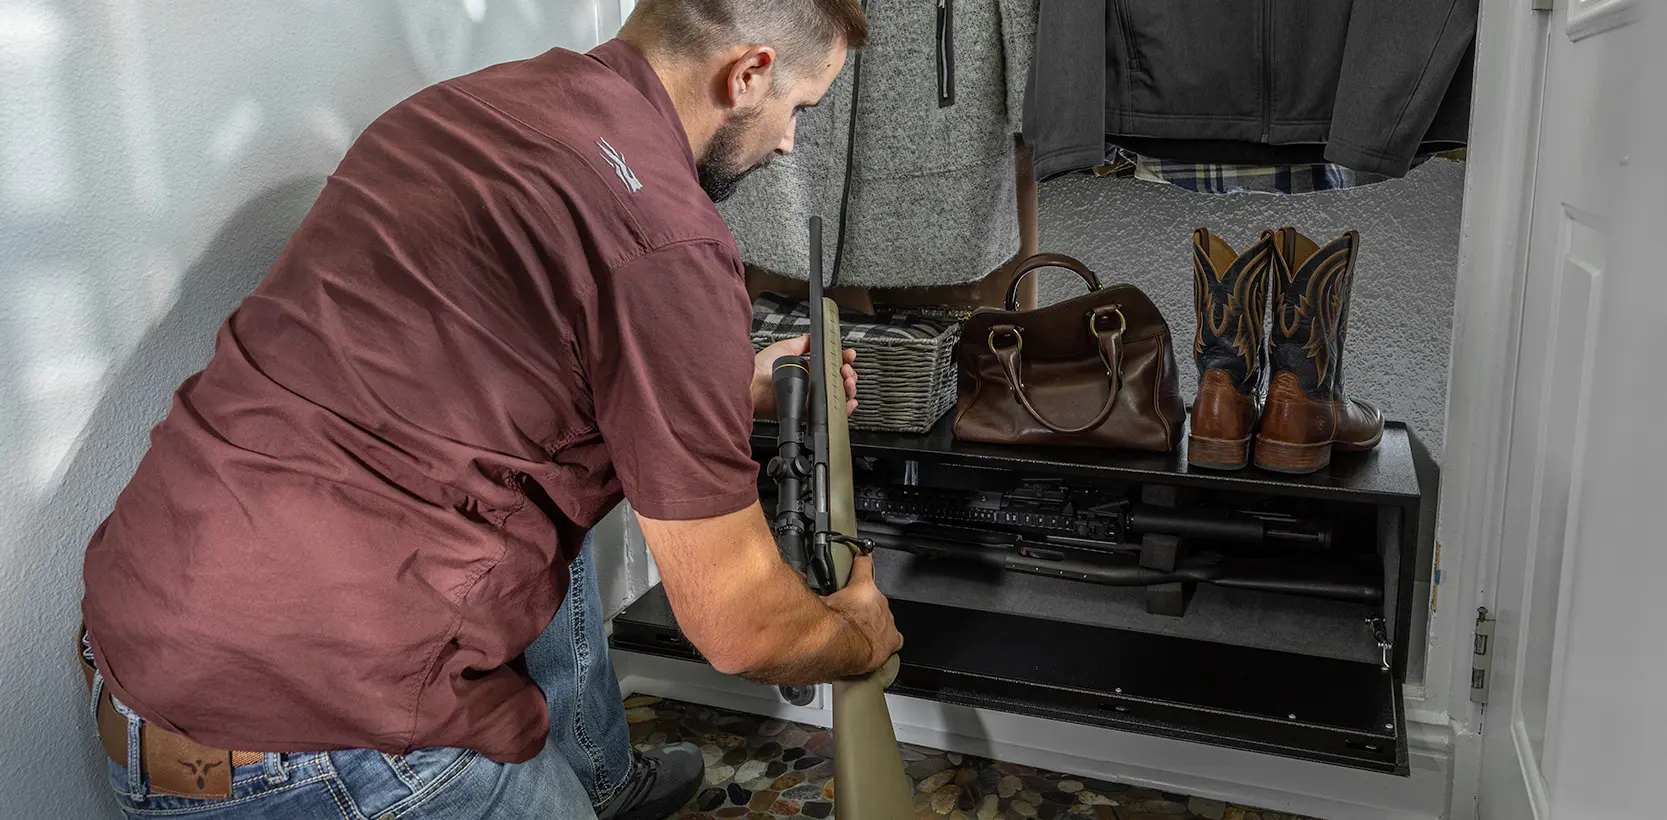 Slide number 3 Store up to threerifles in the newAR GUNLOCKER XL
The fully enclosed design of our AR Gunlocker XL provides convenient, tamper-proof security for up to three tactical length rifles. 
Find Out More